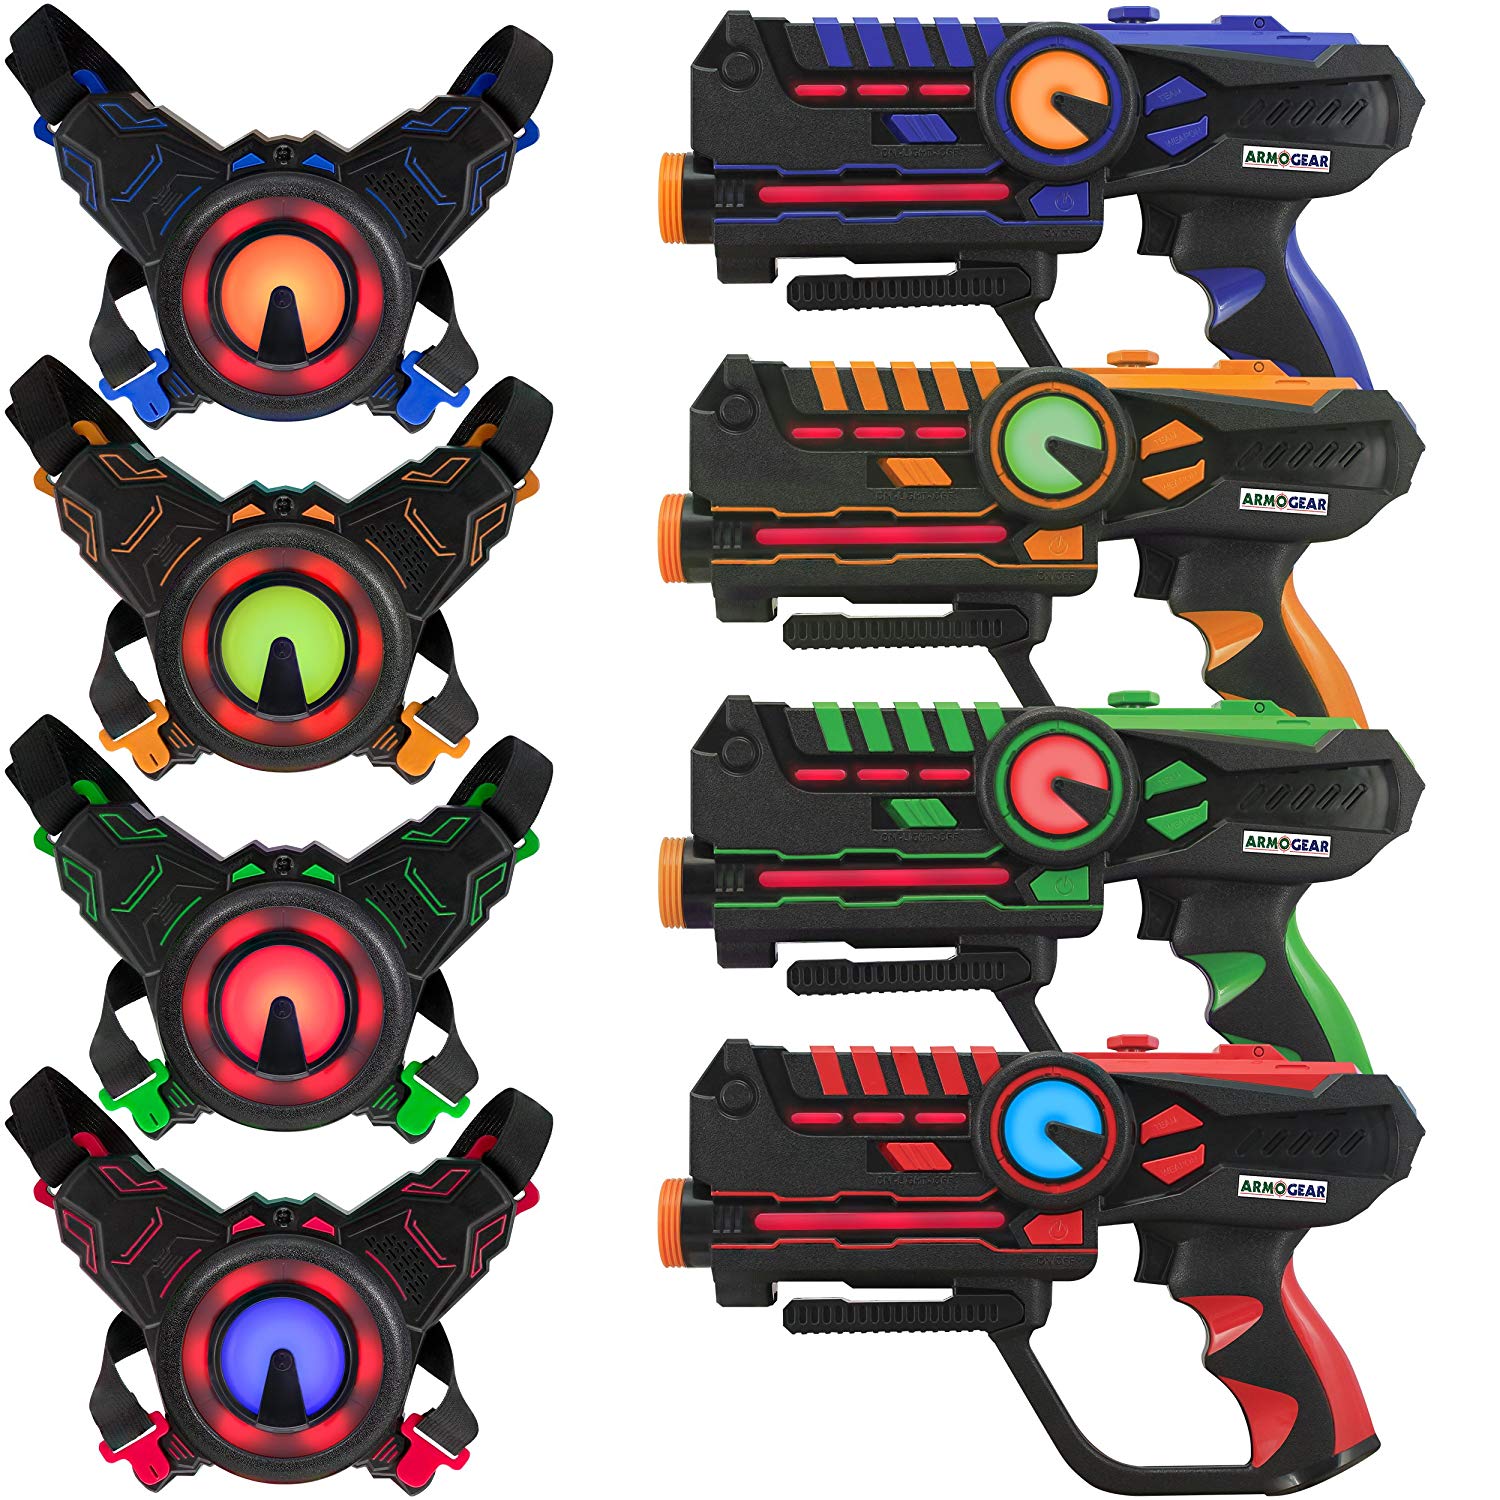 ArmoGear Infrared Laser Tag Blasters 